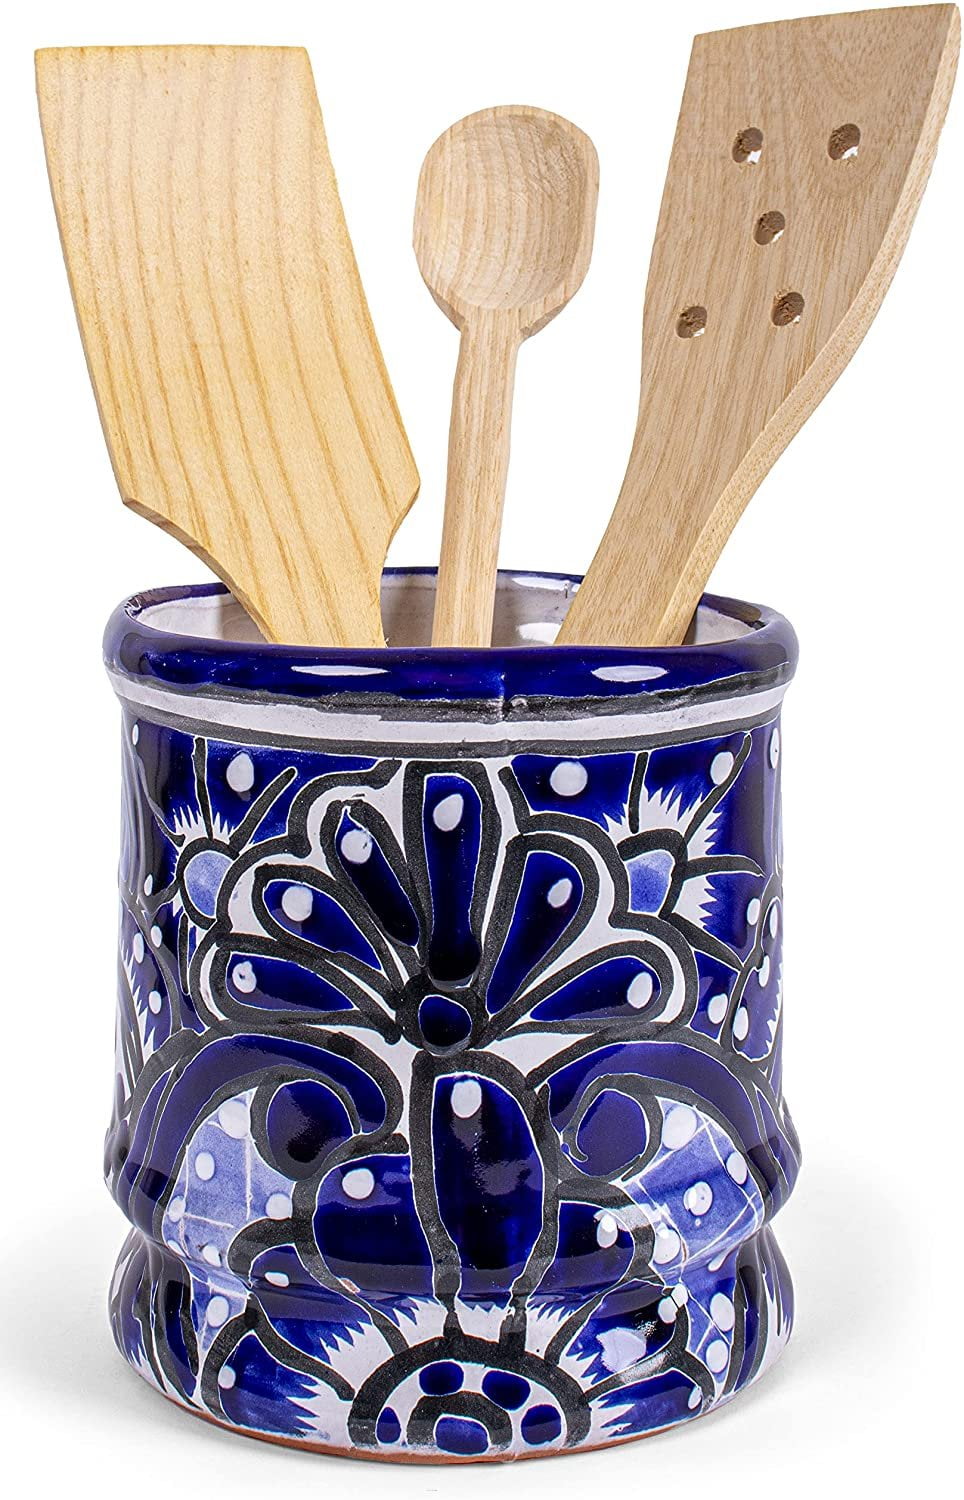 Jayde N Grey Talavera Hand Painted Ceramic Utensil Holder Canister Crock For Cooking Spoons For An Organized Colorful Kitchen Cobalt Blue Multi 